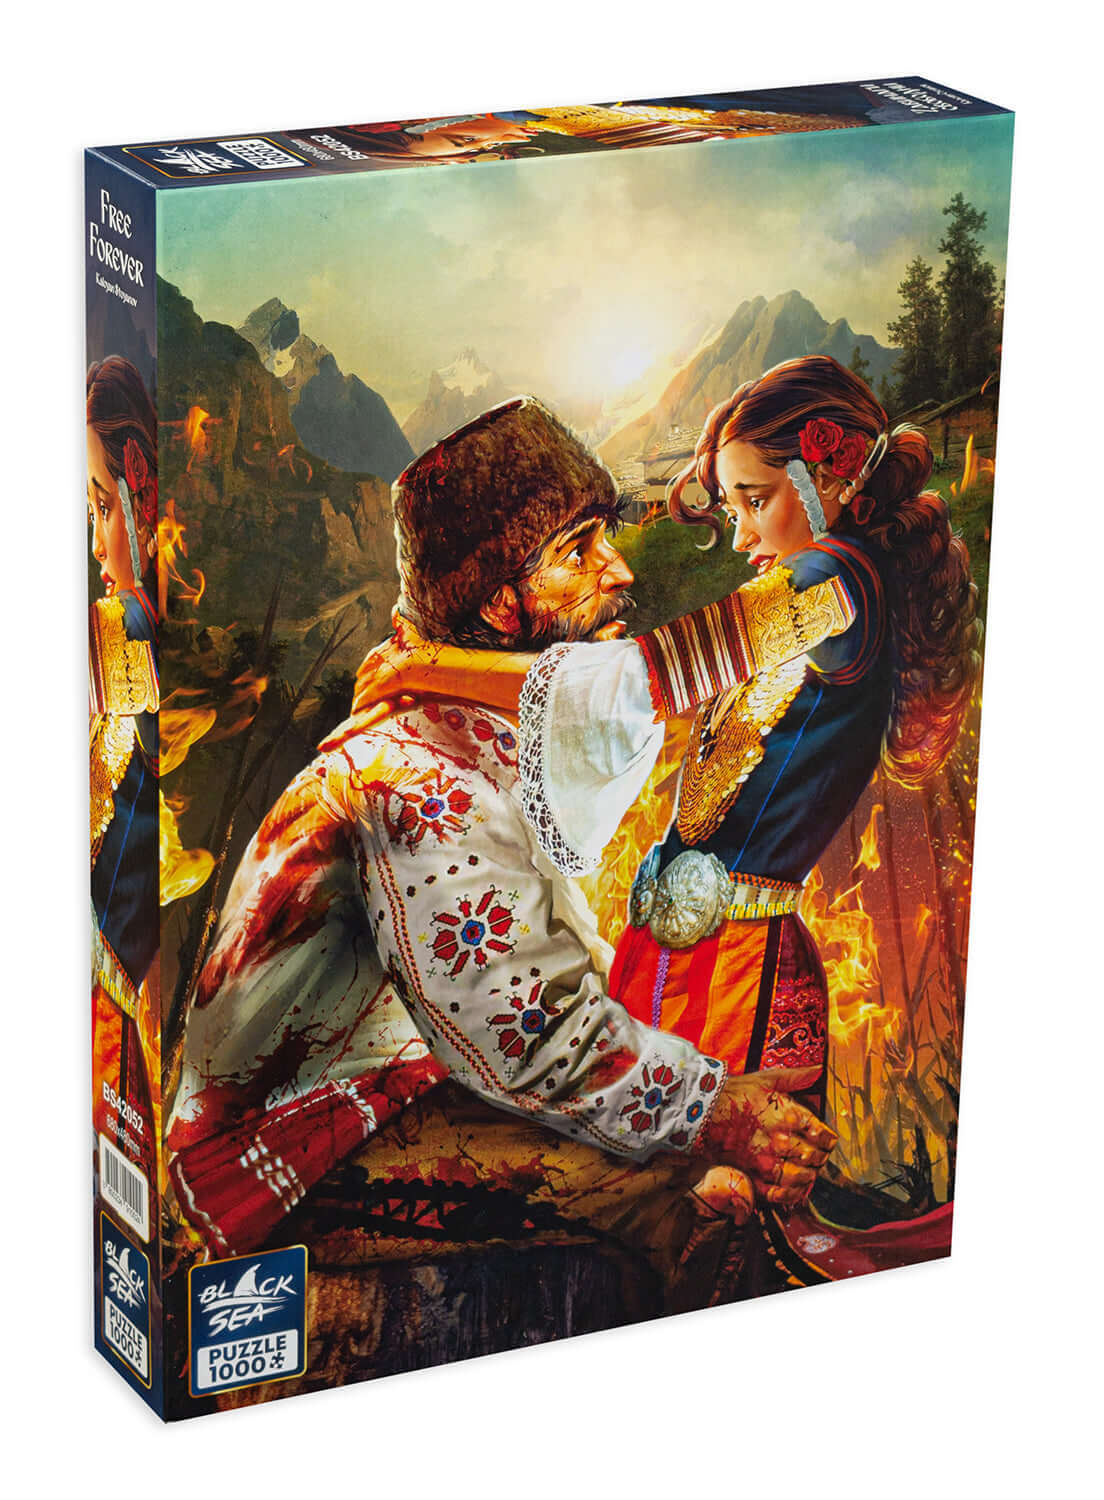 Puzzle Black Sea Premium 1000 pieces - Free Forever, Thus ends the centuries-old struggle – in flame, and ash, and ruin. A dream come true, victory is ours now, and all shackles are shed. The earth thirstily soaks up the last droplets of blood, as our des